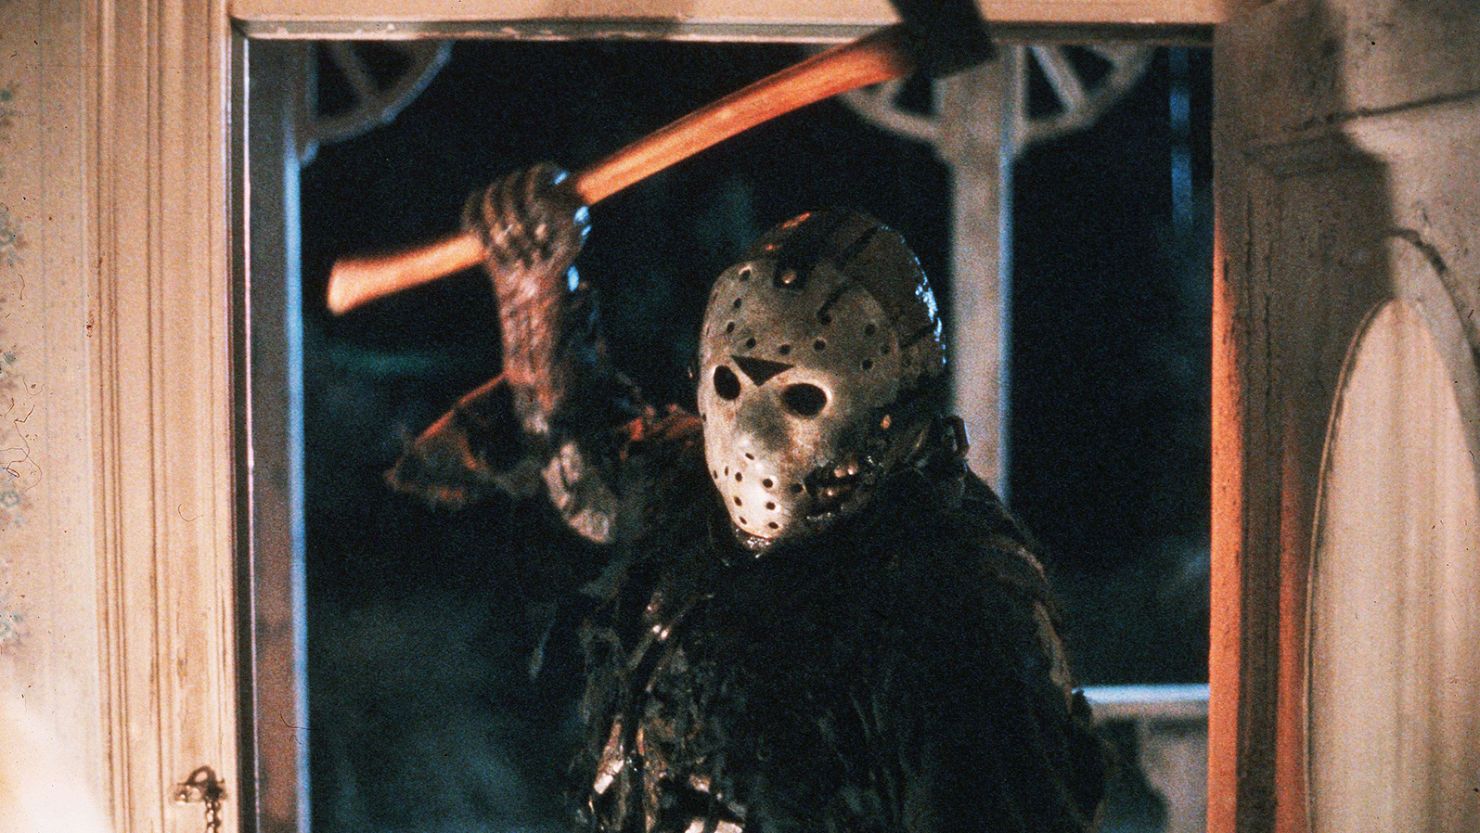 Friday the 13th: The Game's Single Player Content Still Doesn't